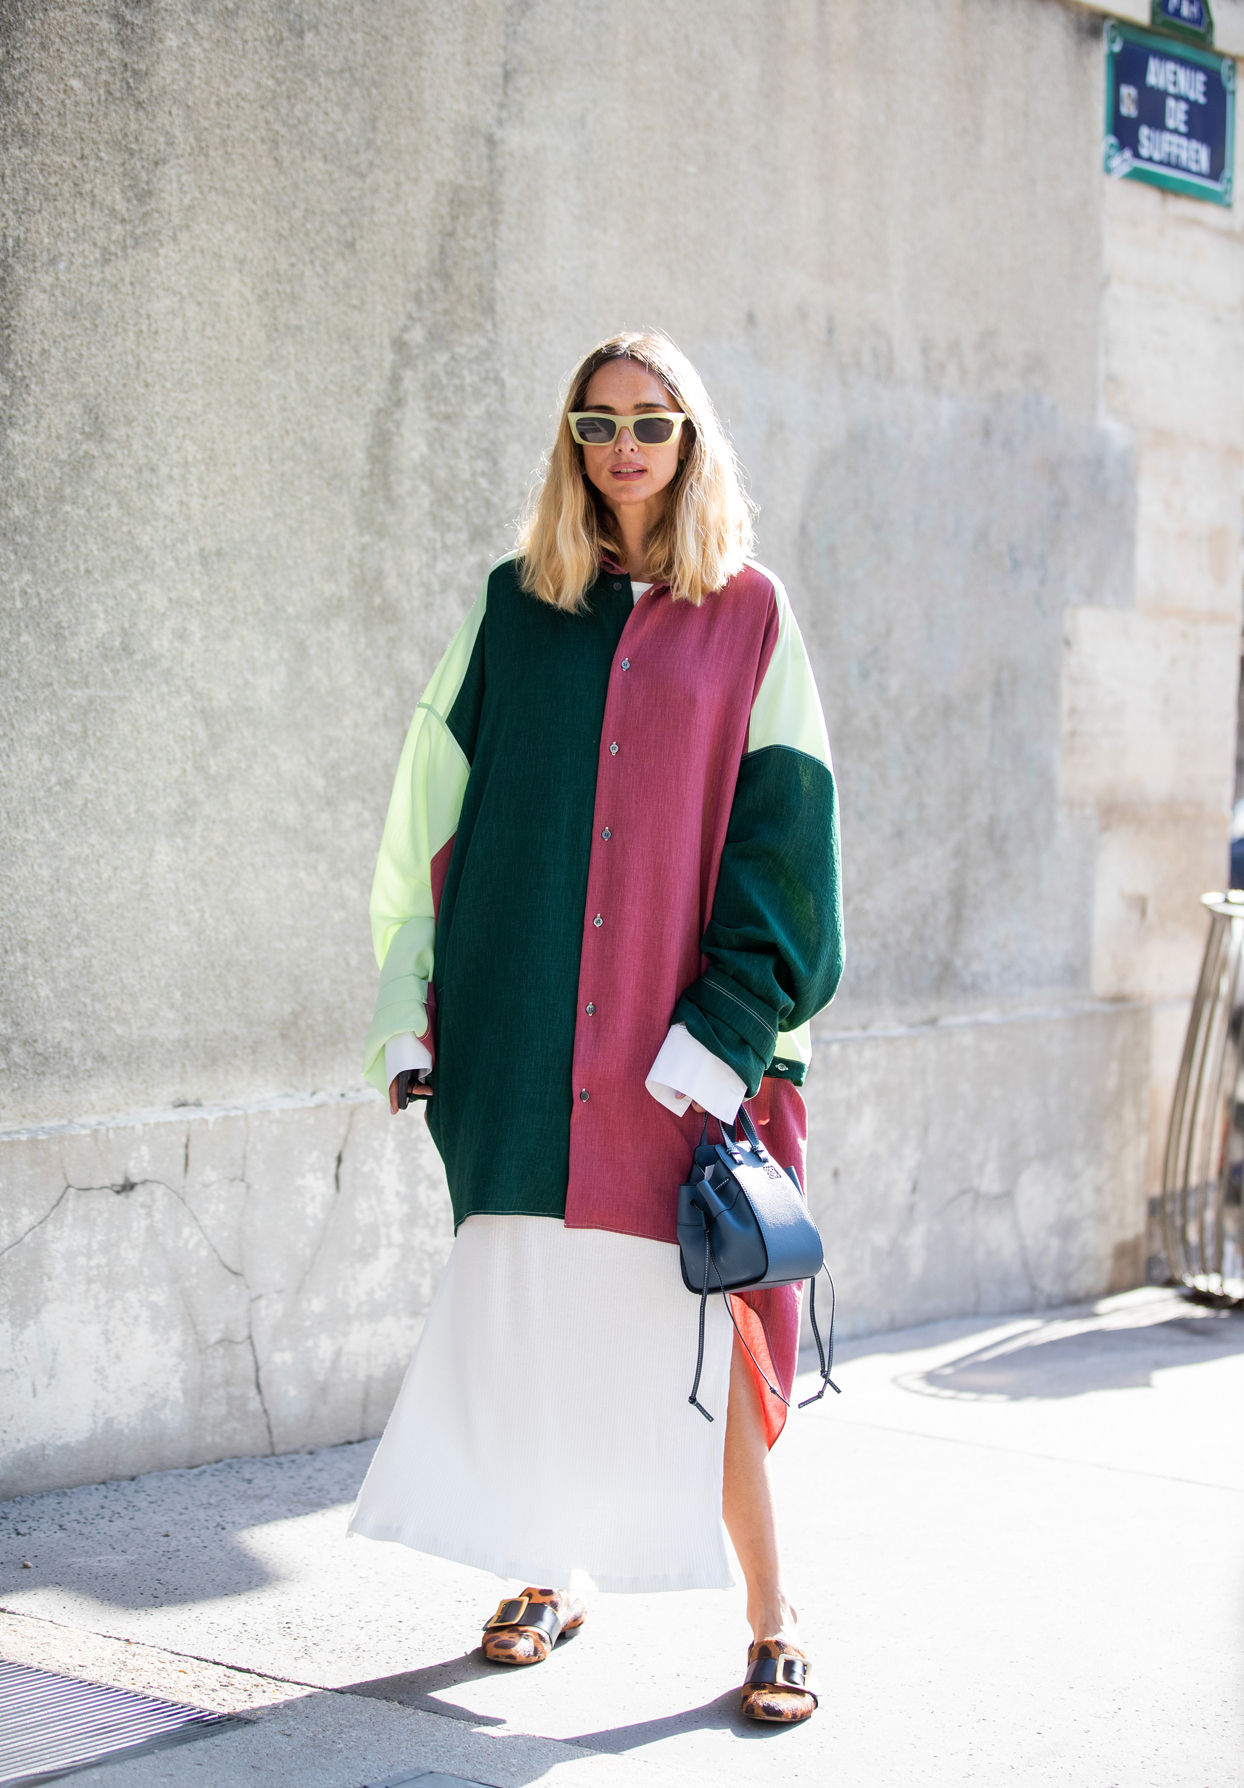 The Best Street Style To Inspire You For Spring - Grazia